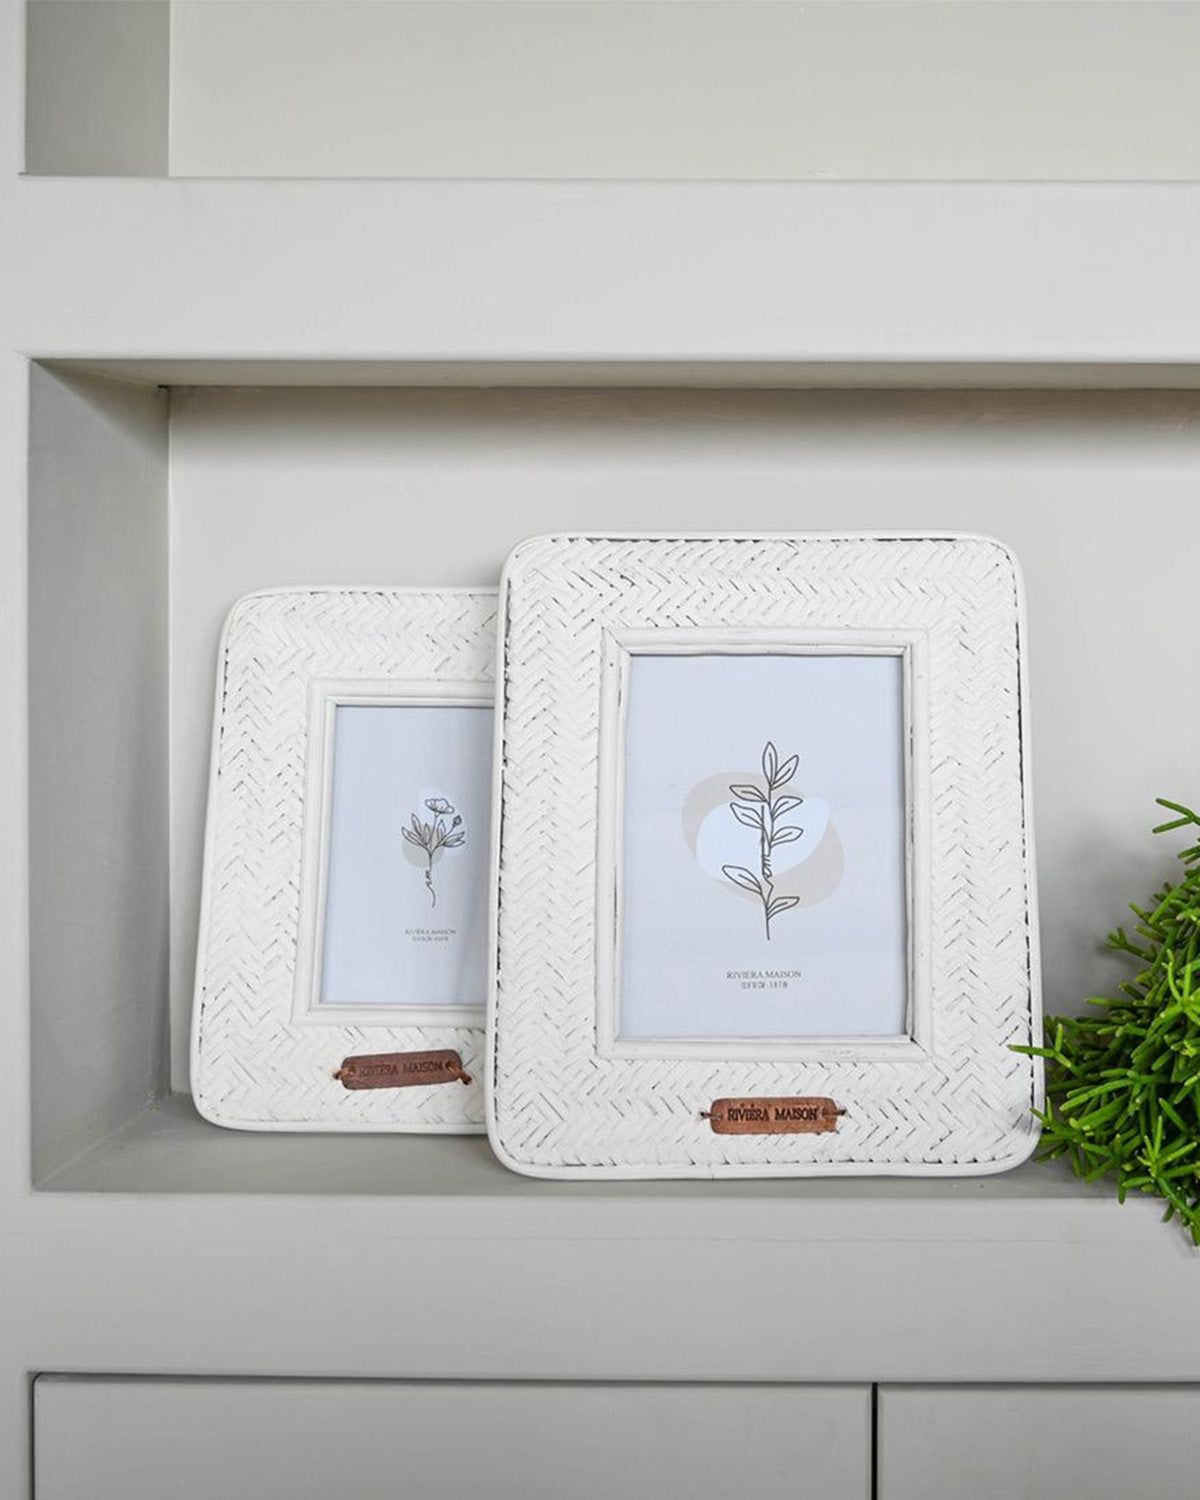 Two BRAIDED PHOTO FRAMES in color WHITE  made of rustic rattan in a braided pattern